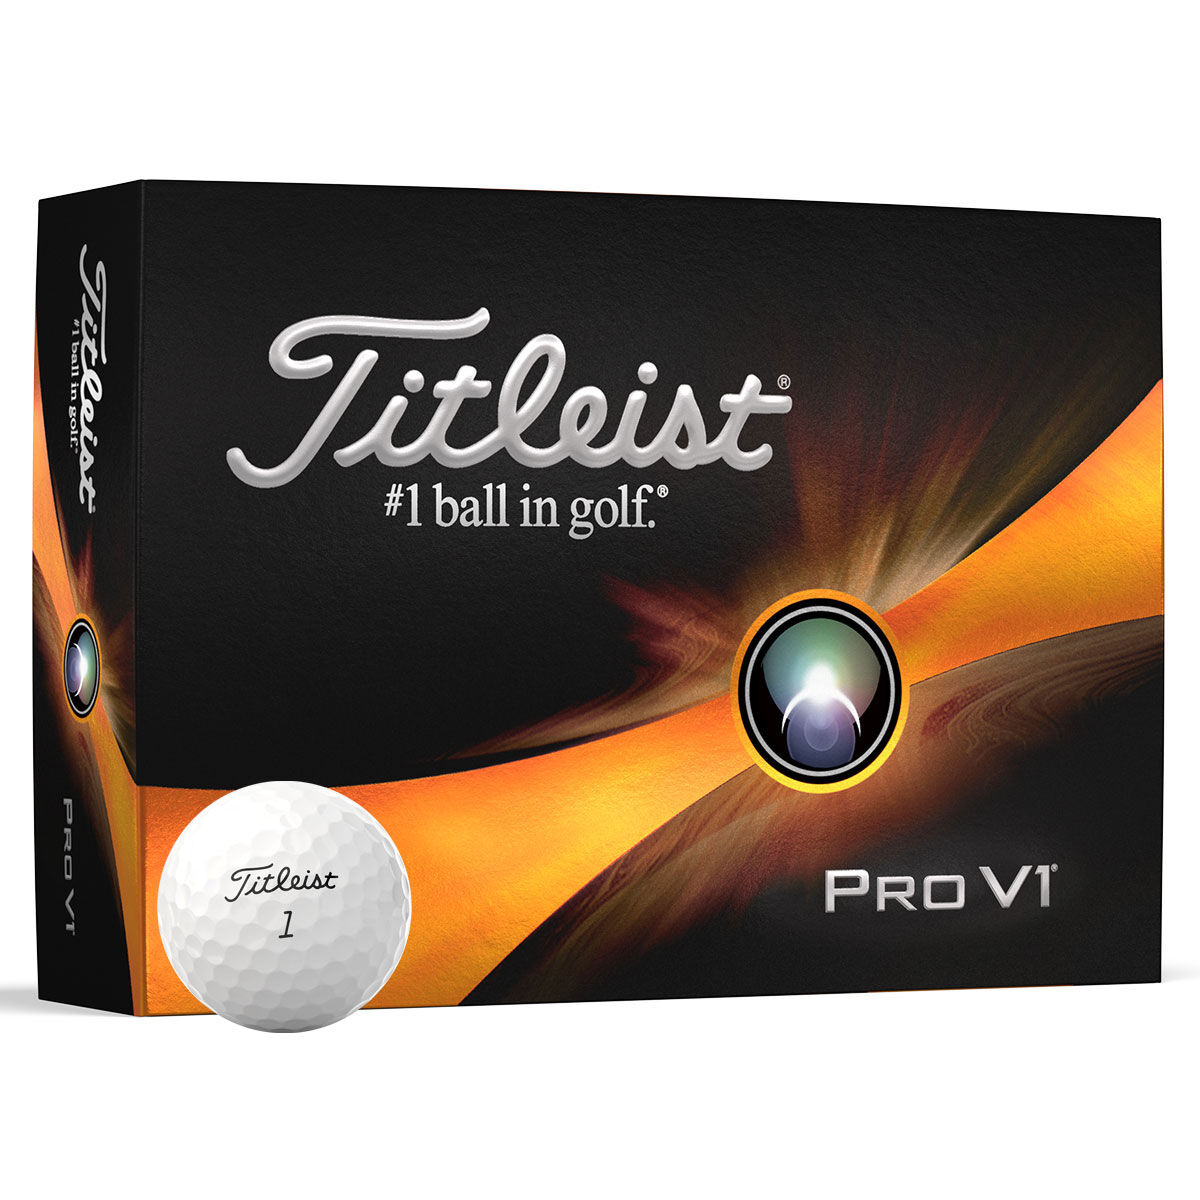 Titleist White Pro V1 12 Golf Ball Pack | American Golf, One Size